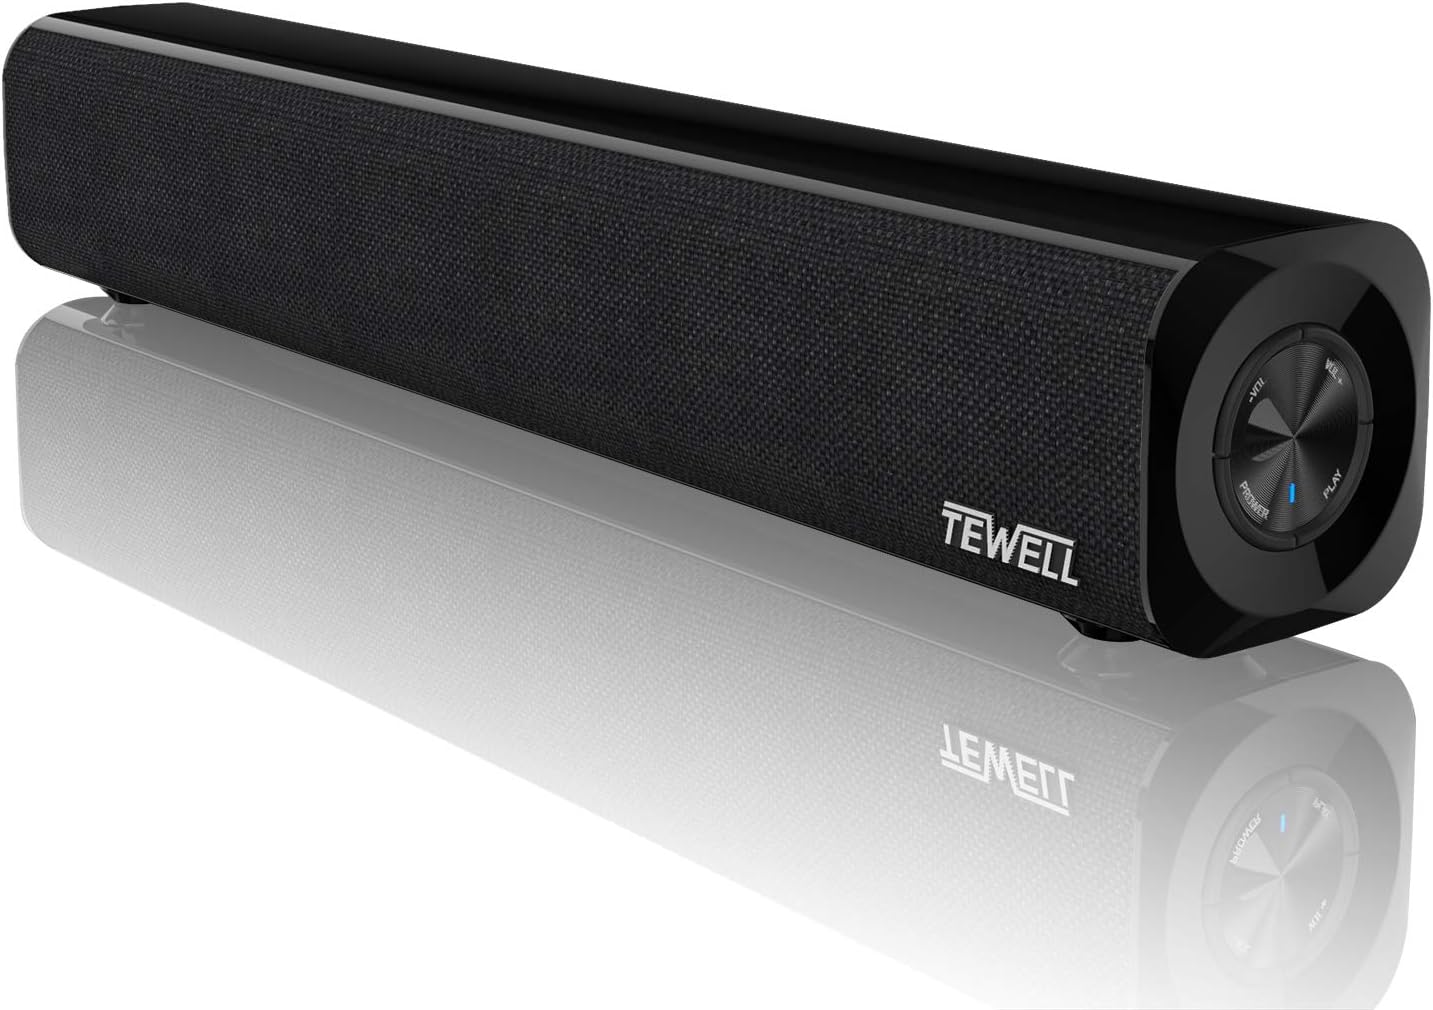 TEWELL Mini Sound Bar, USB Powered Projector Speaker for Desktop, Aux-in Wired and Wireless Stereo Speakers with Strong Bass for PC, Gaming, Tablets and Cellphone